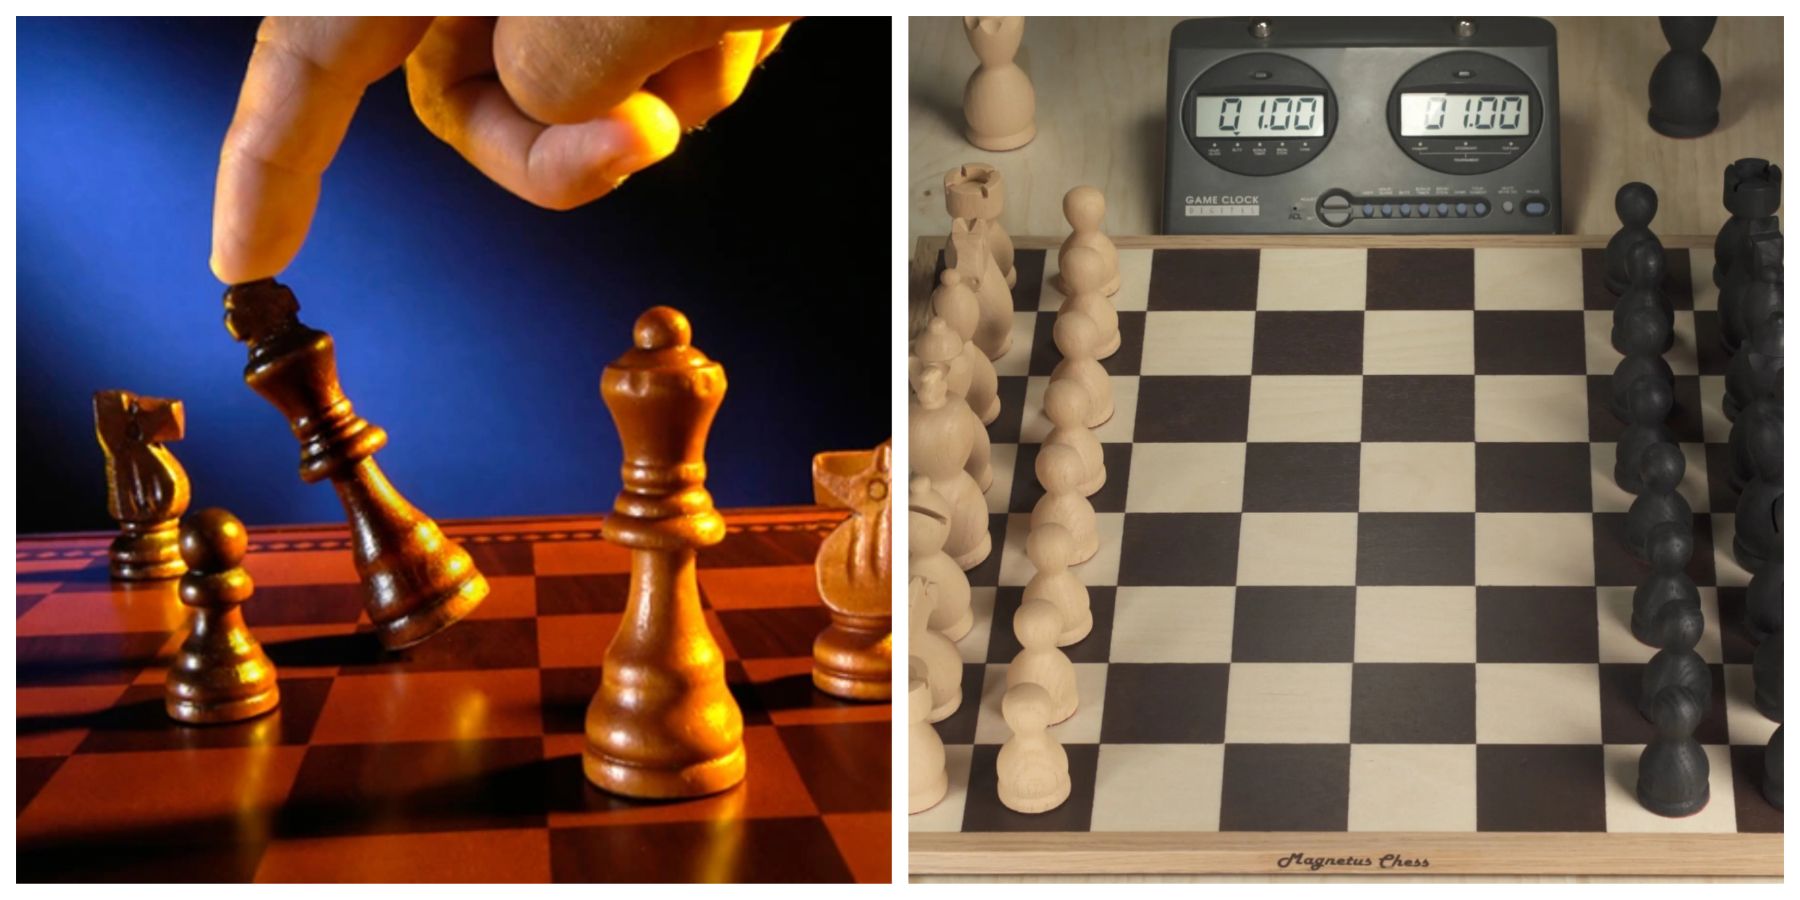 What is the point in playing Bullet and Hyper Bullet chess? - Quora